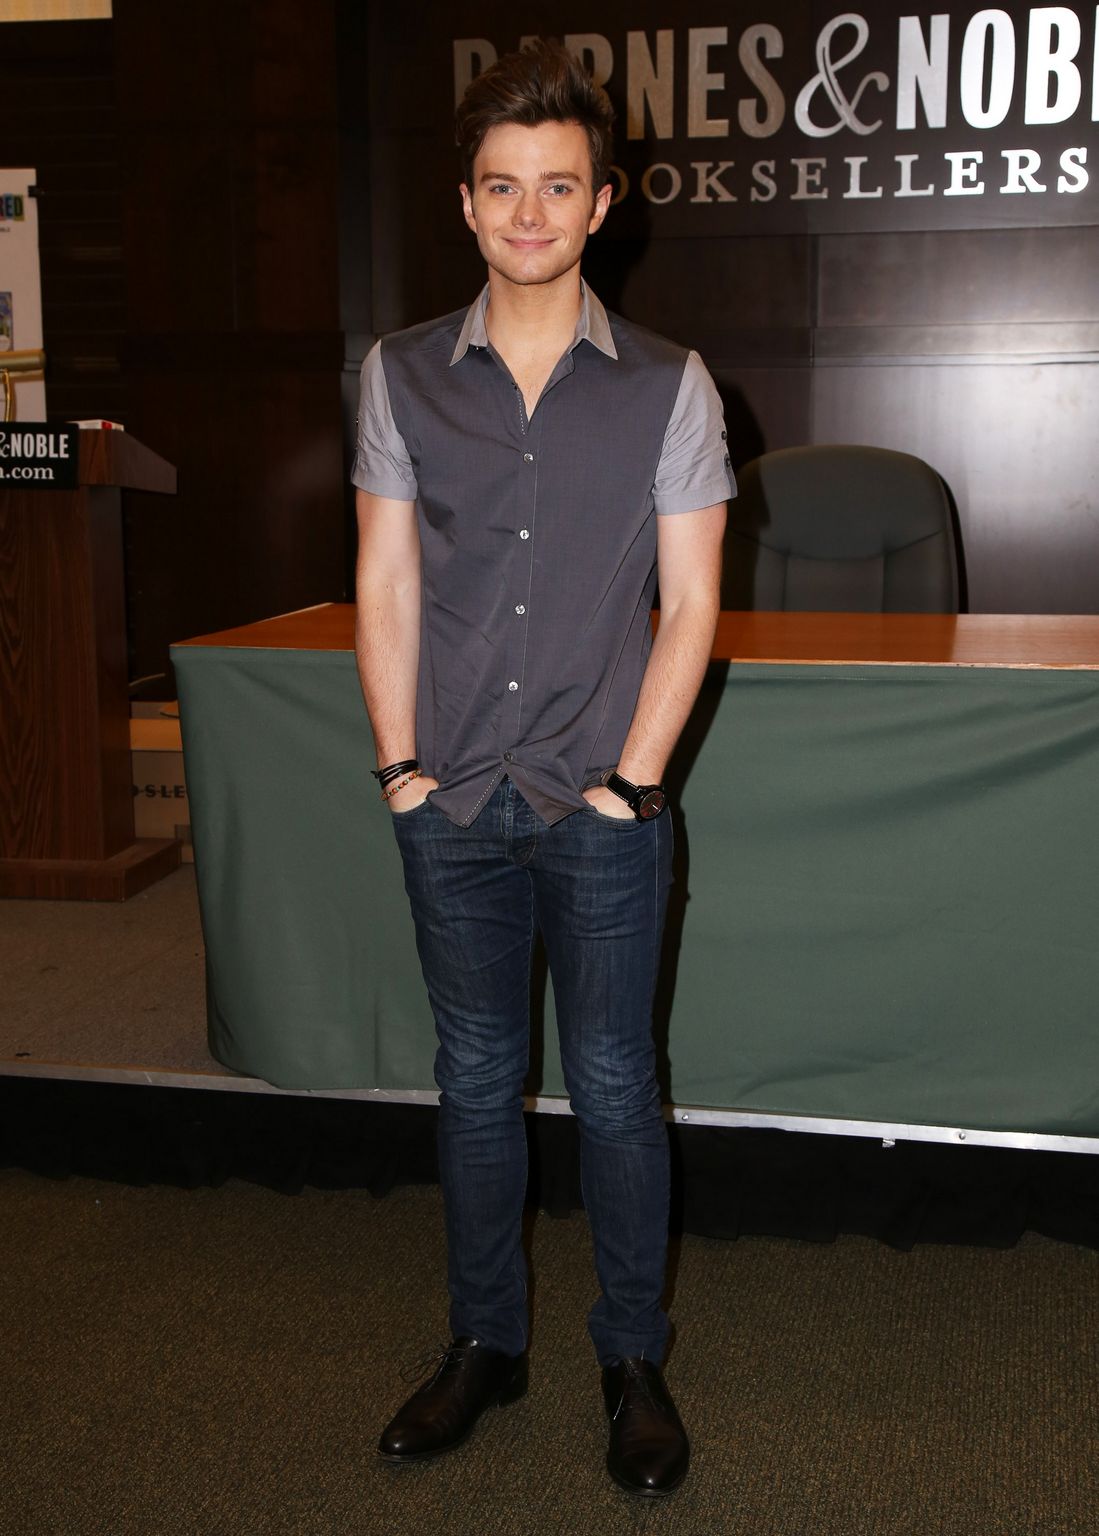 Chris Colfer at The Land of Stories: Beyonde Kingdoms Book Signing Event